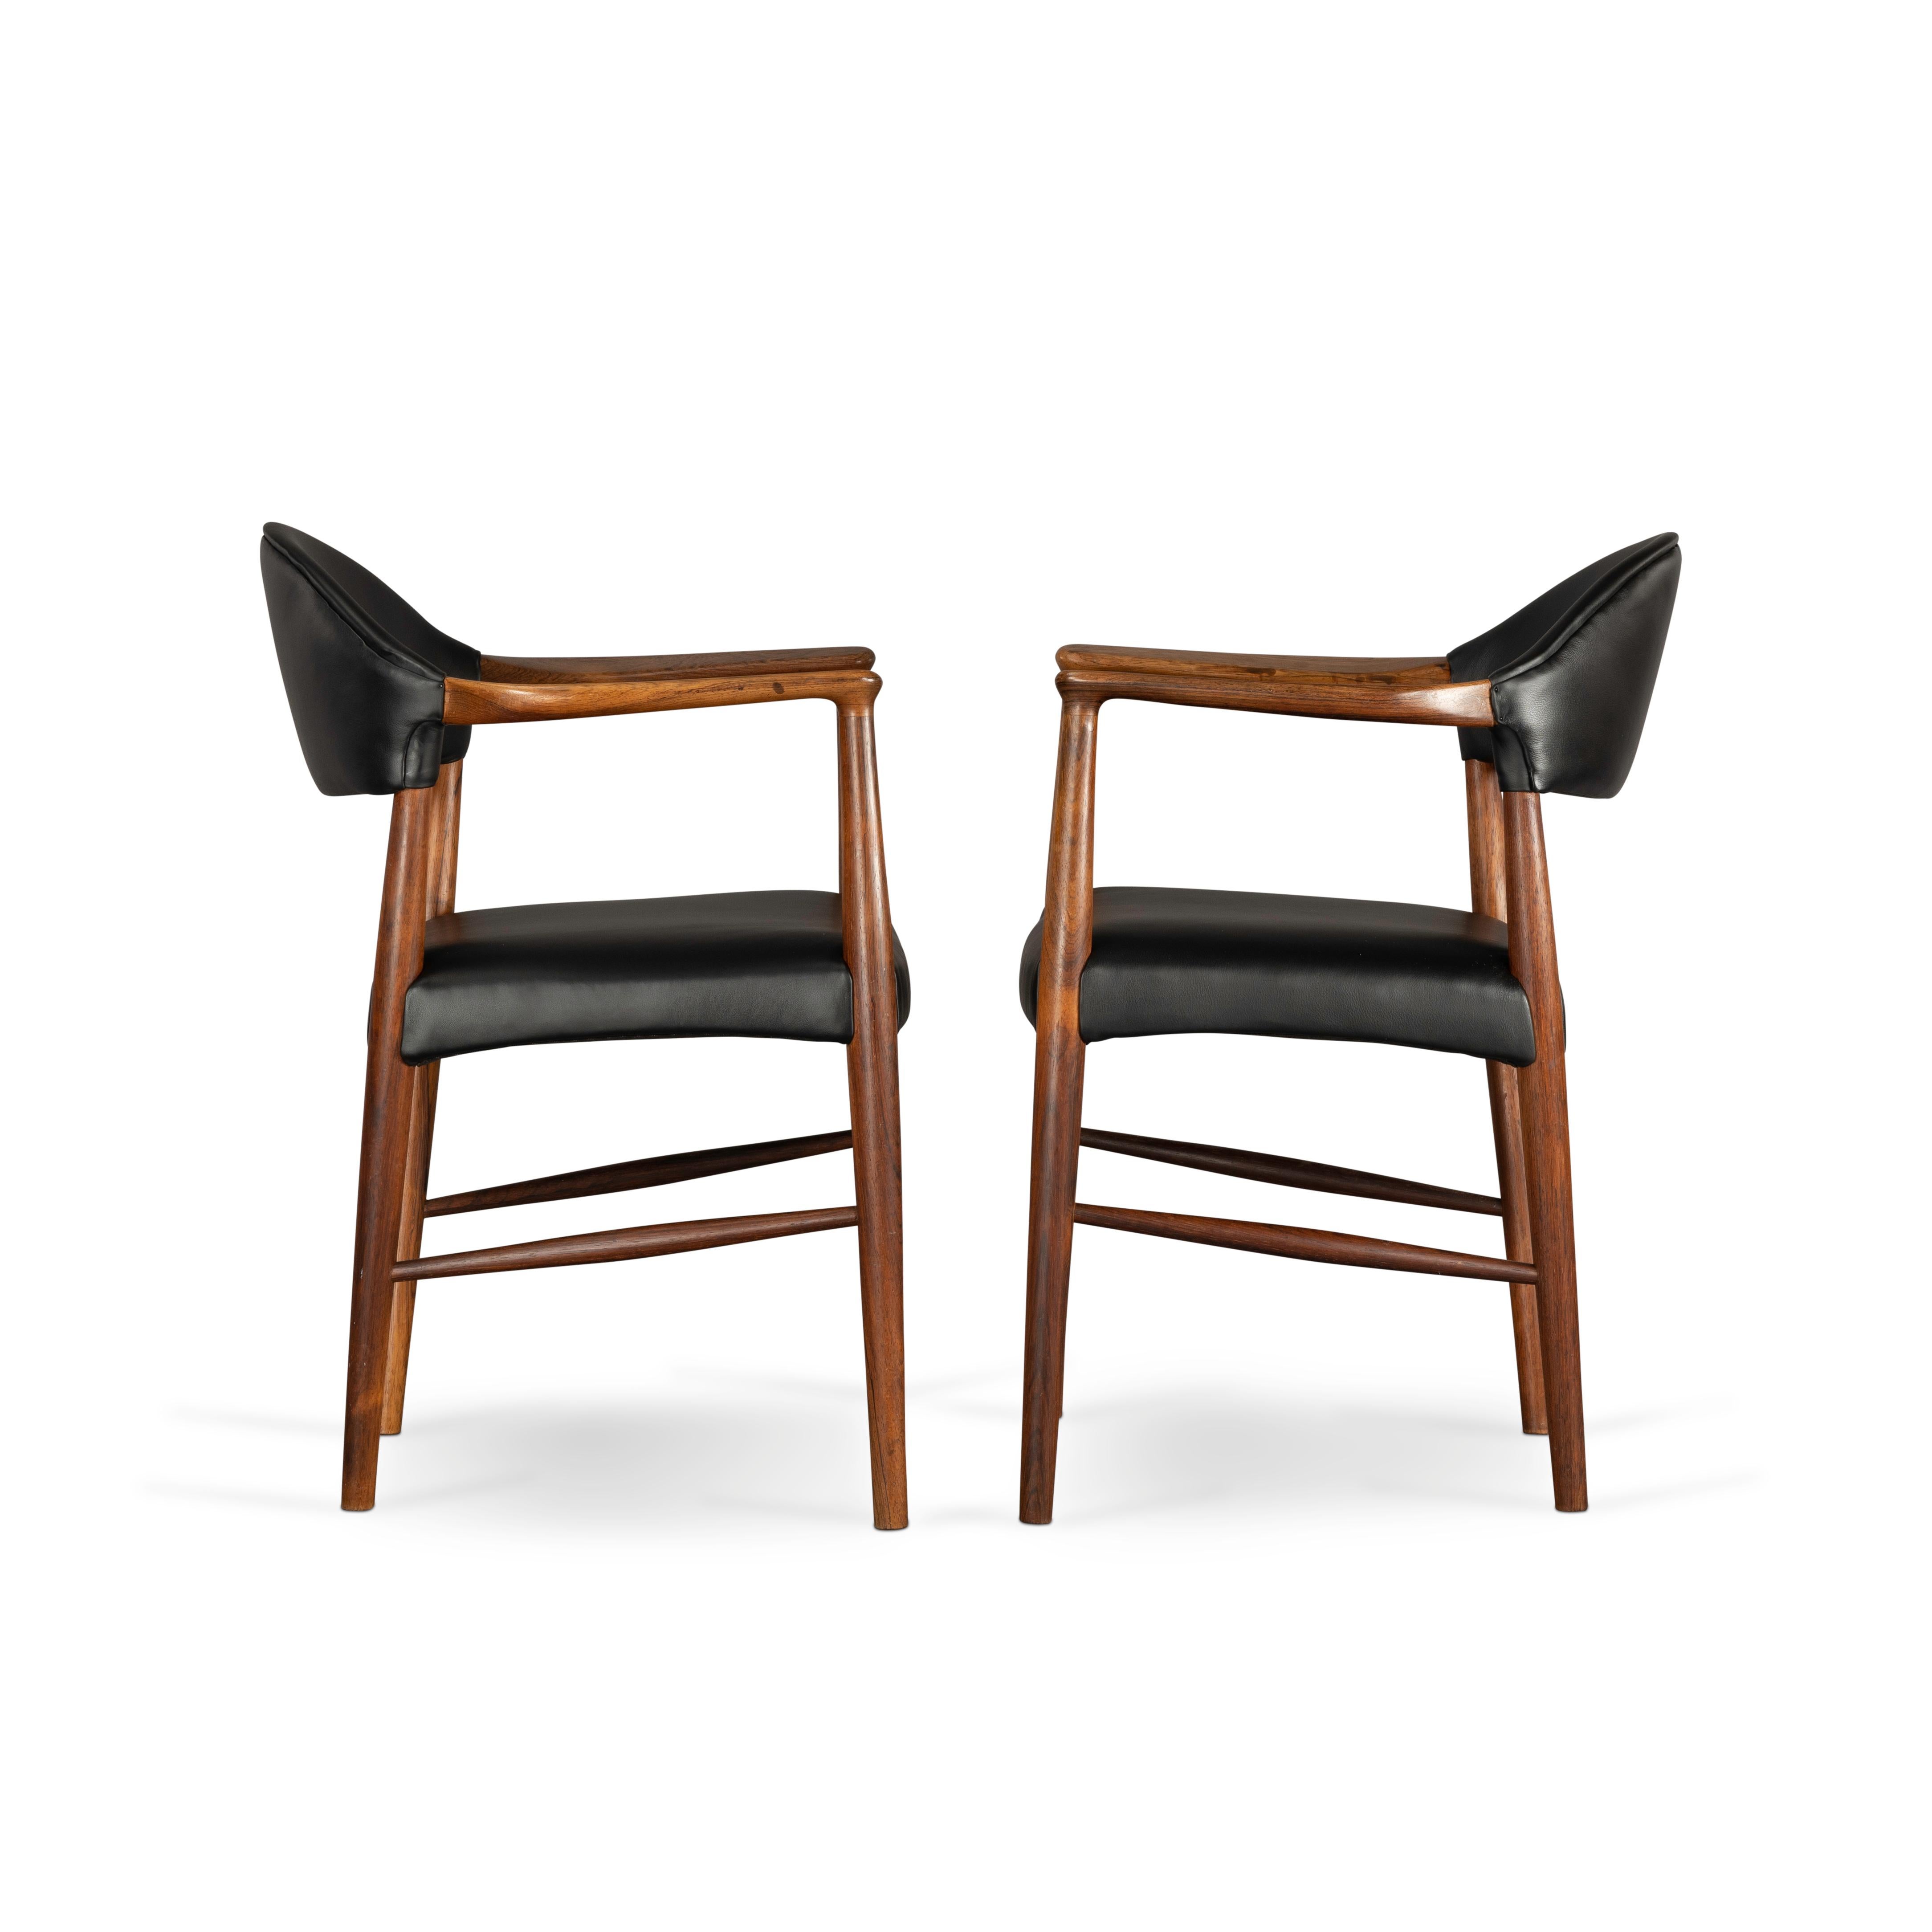 Kurt Olsen designed a heavy palisander/rosewood frame for this particular chair. It just builds character for the chair. On this example the use wear and polish of the arm rests give it a 'used for centuries' type of look. We renewed the leather on